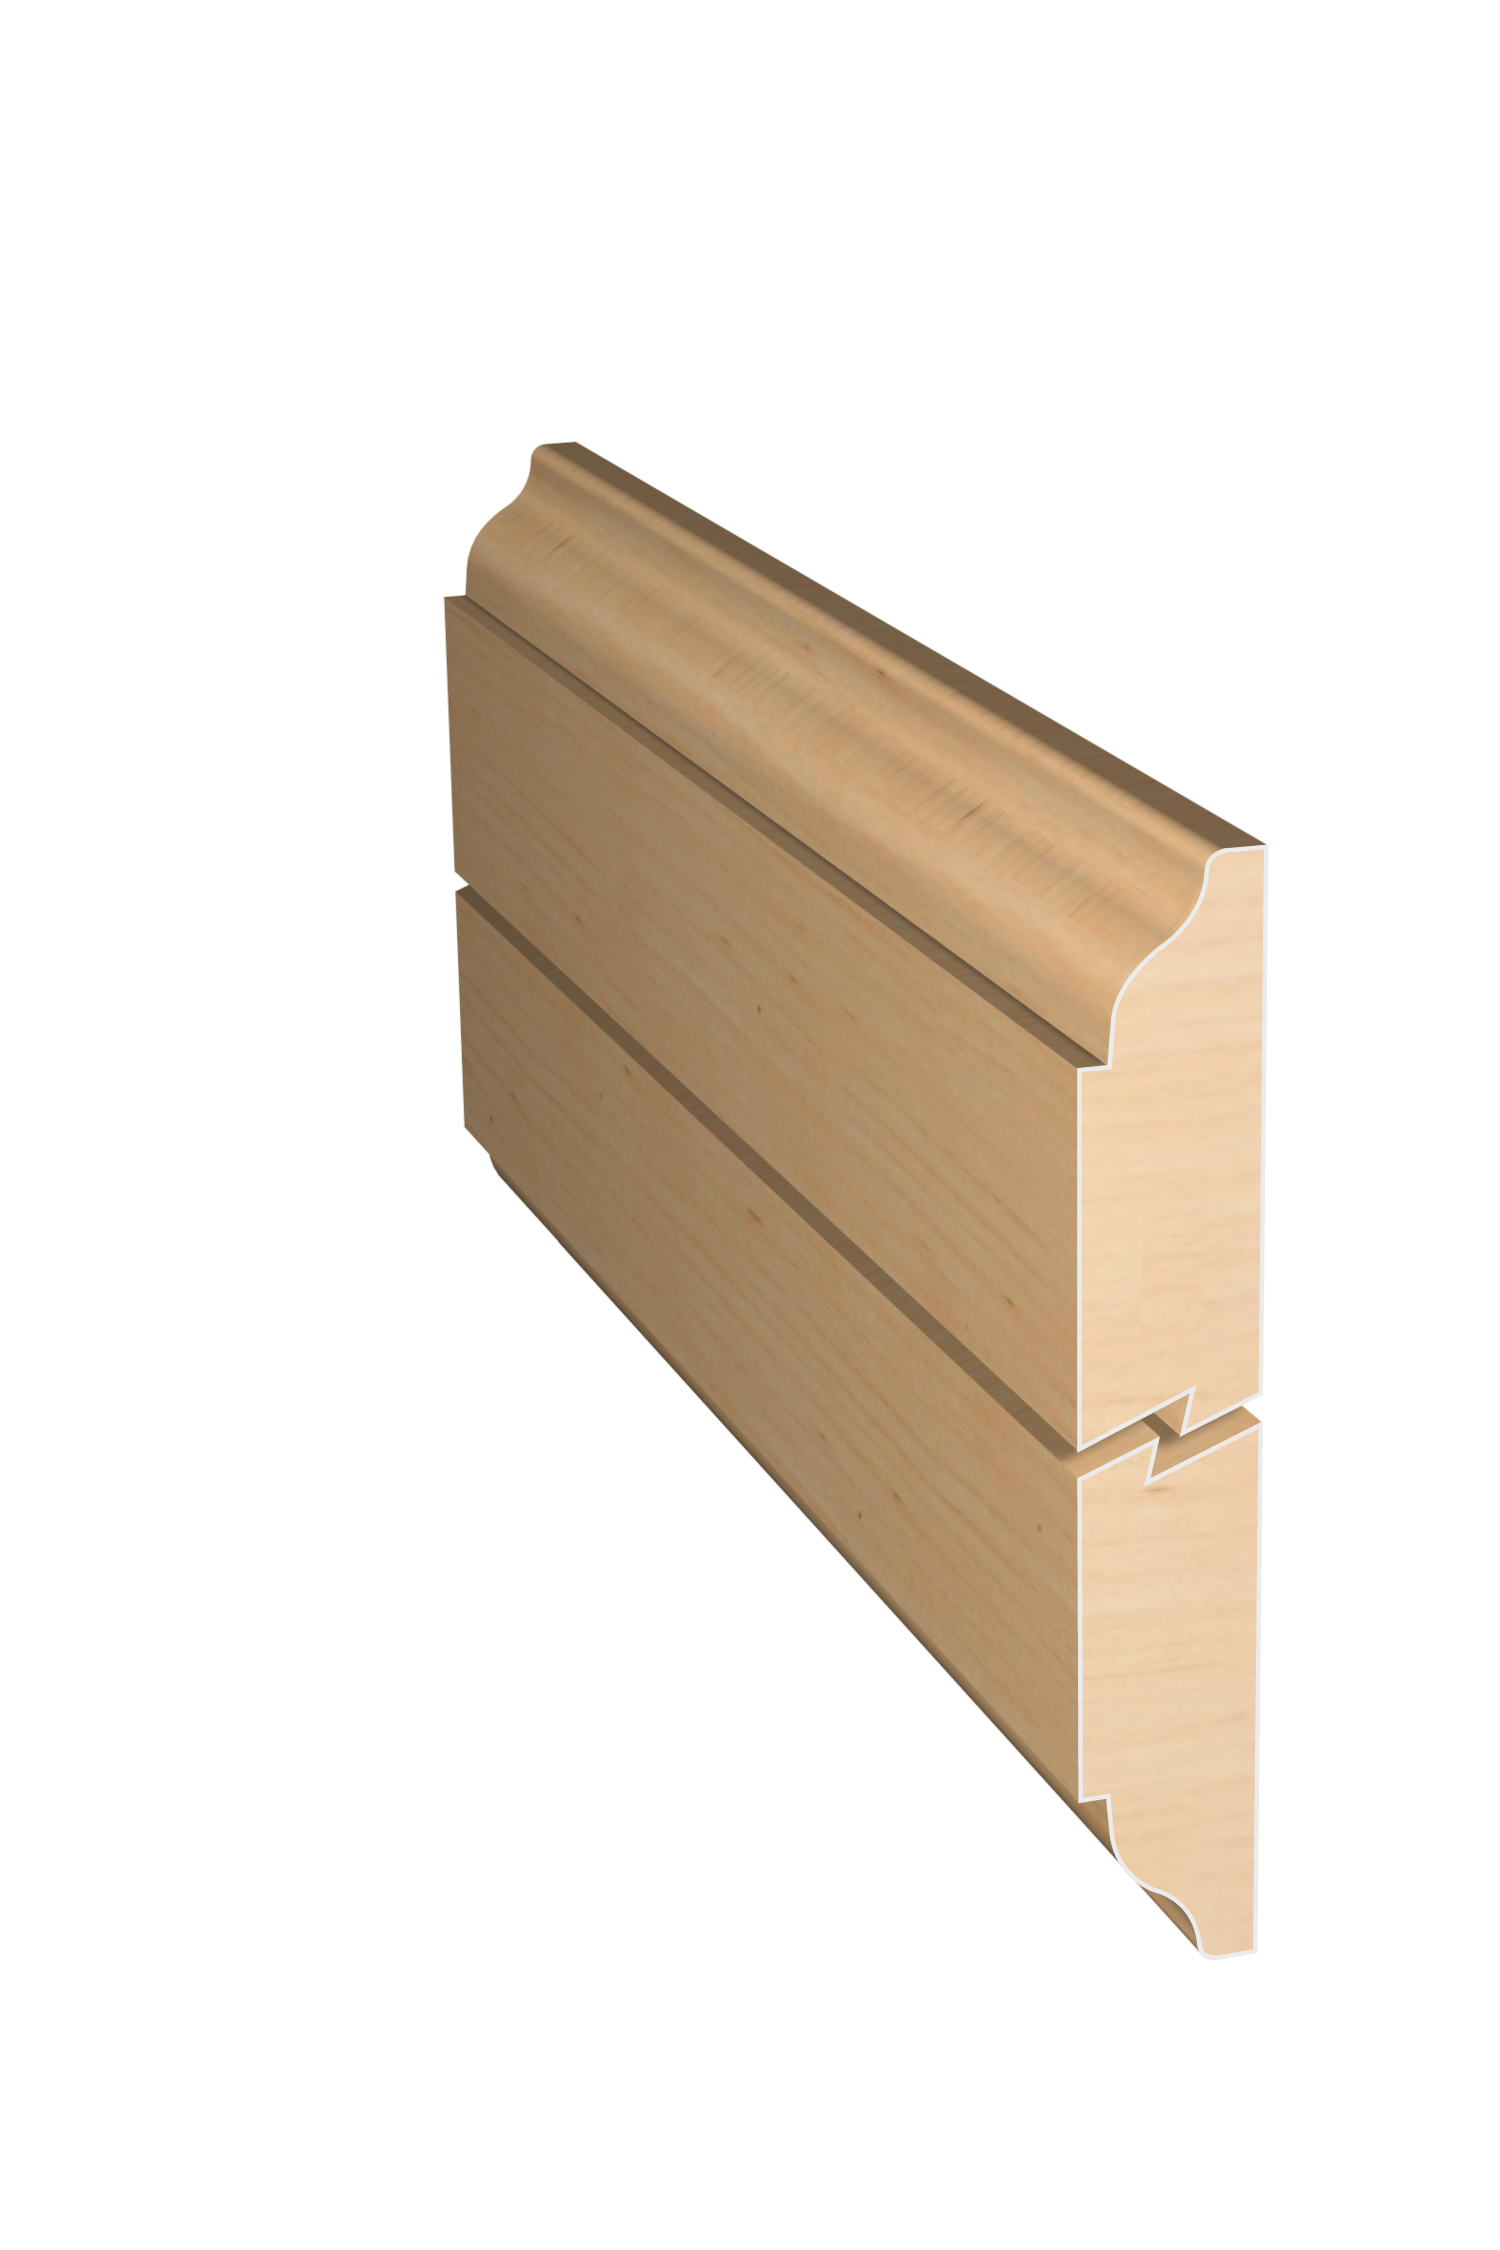 Three dimensional rendering of custom OG or ogee wood molding OGPL4 made by Public Lumber Company in Detroit.